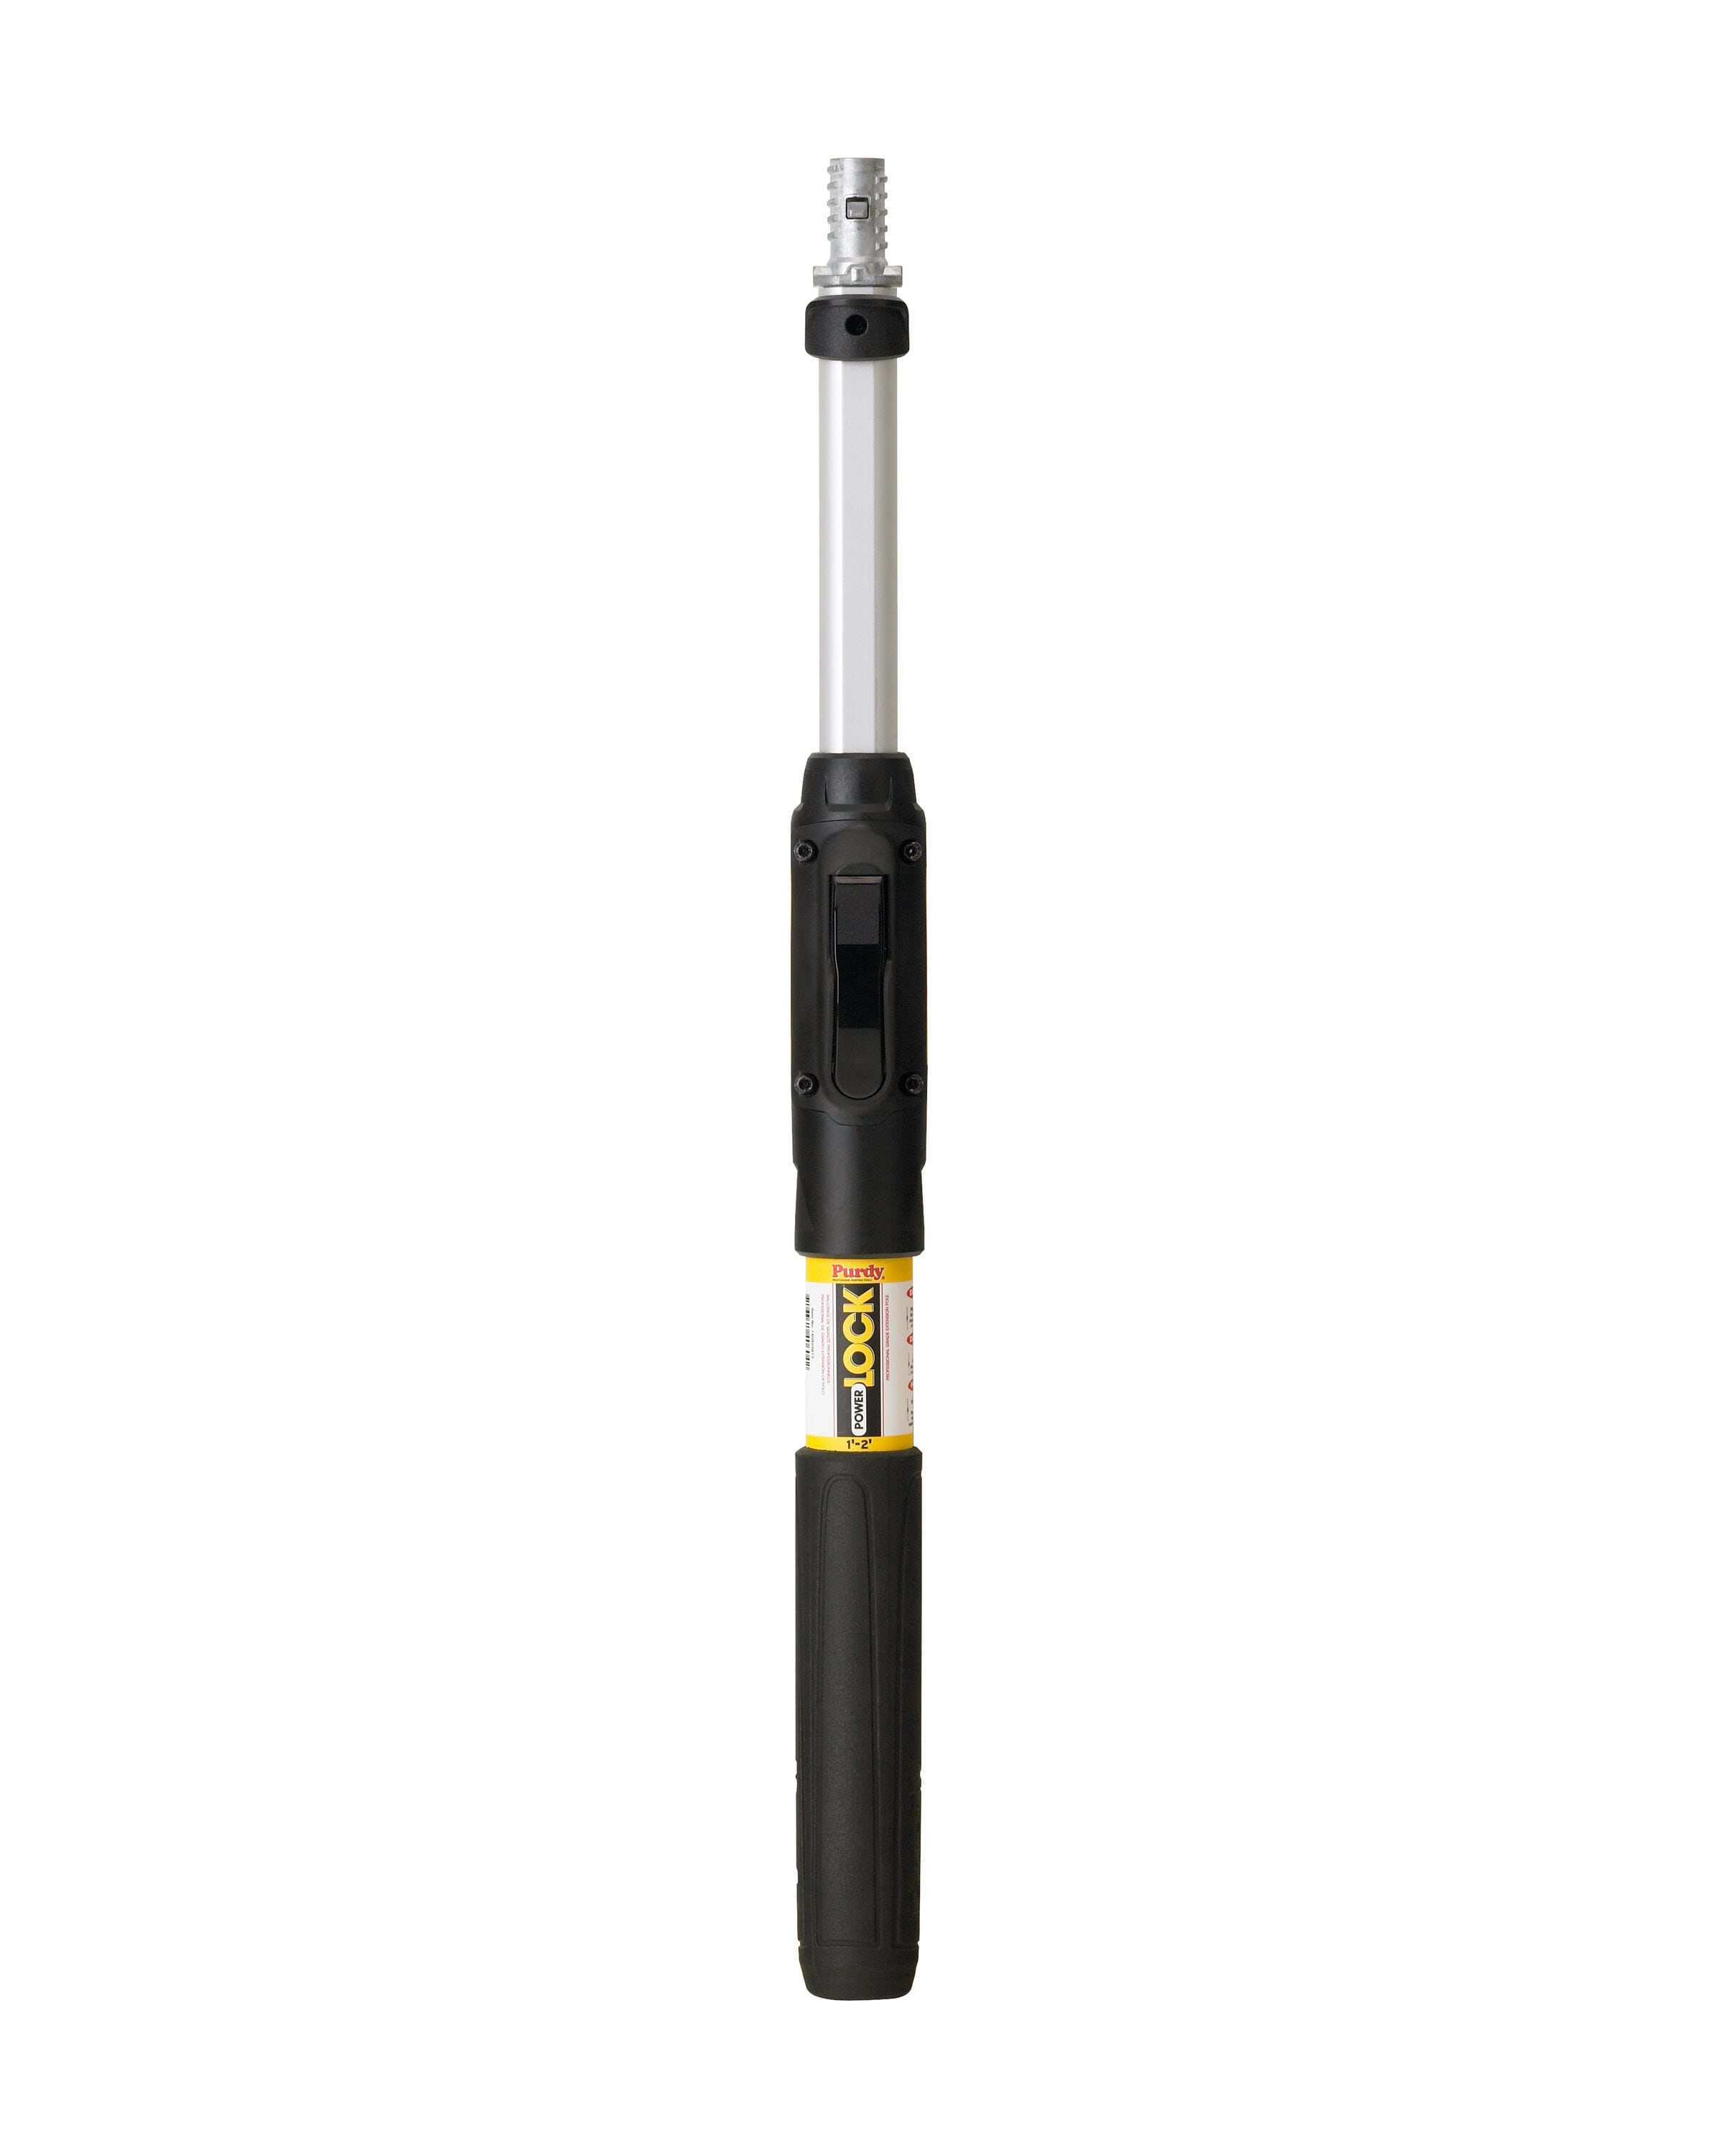 Purdy POWER LOCK 1-ft to 2-ft Telescoping Threaded Extension Pole